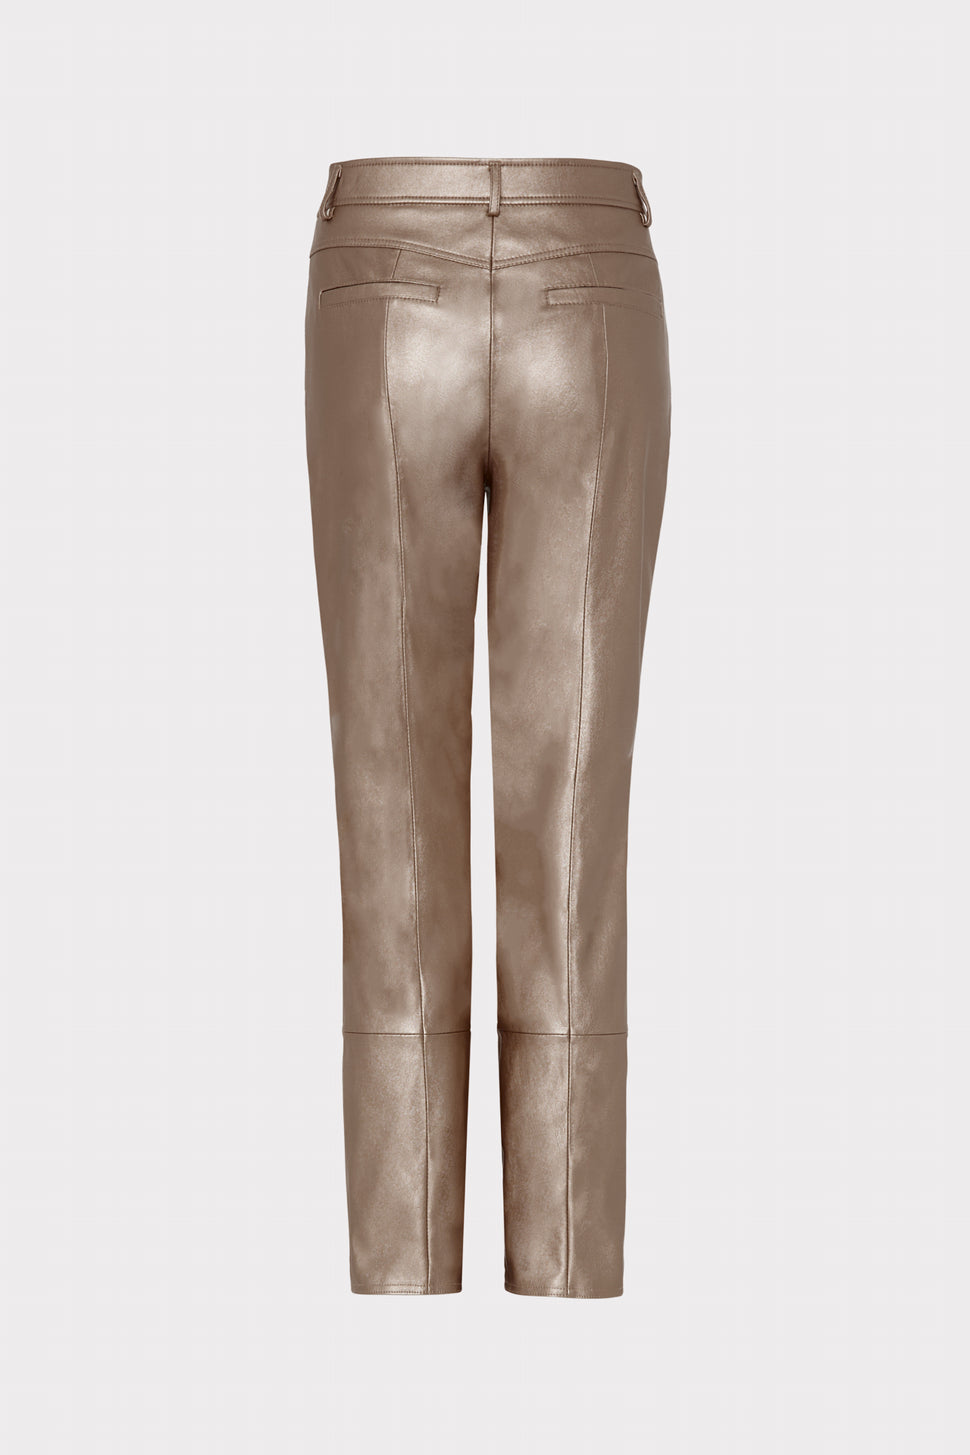 Rue Vegan Leather Pants in Silver